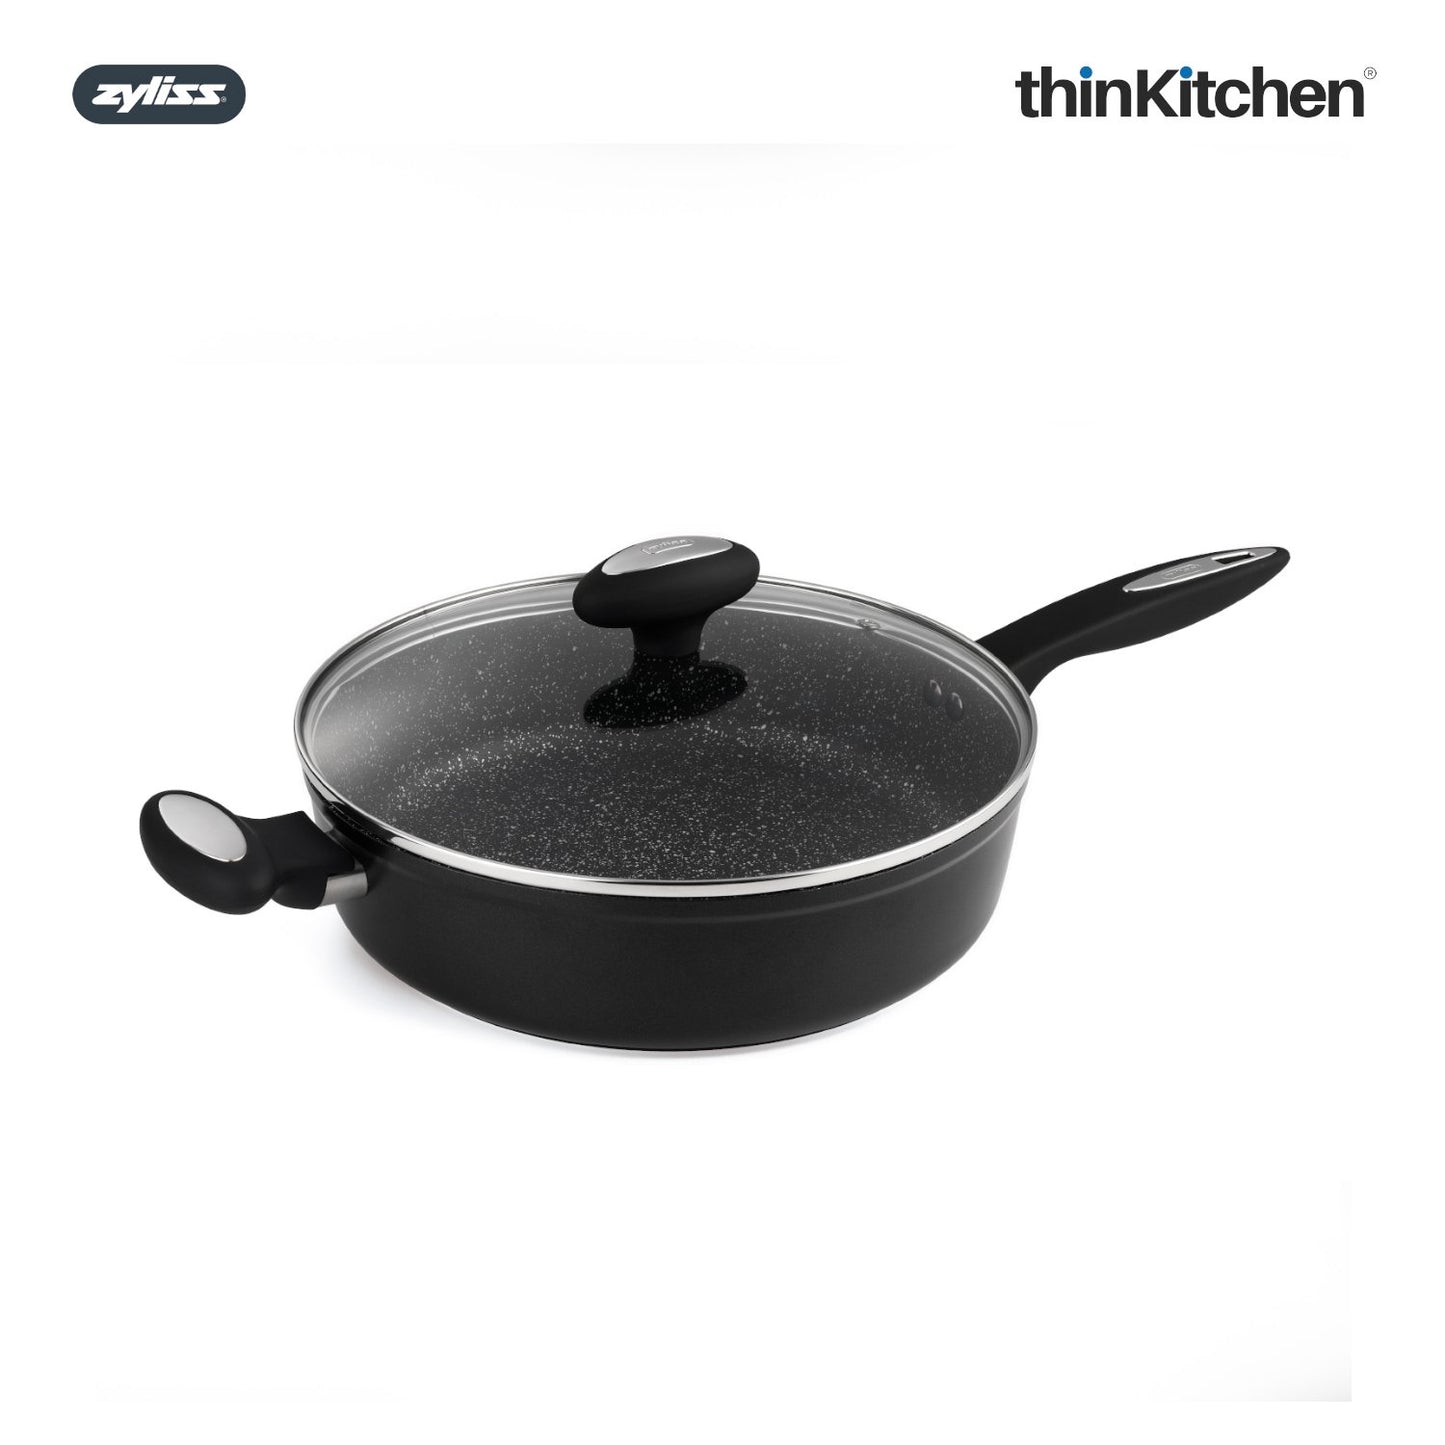 Zyliss Saute Pan With Glass Lid 28cm